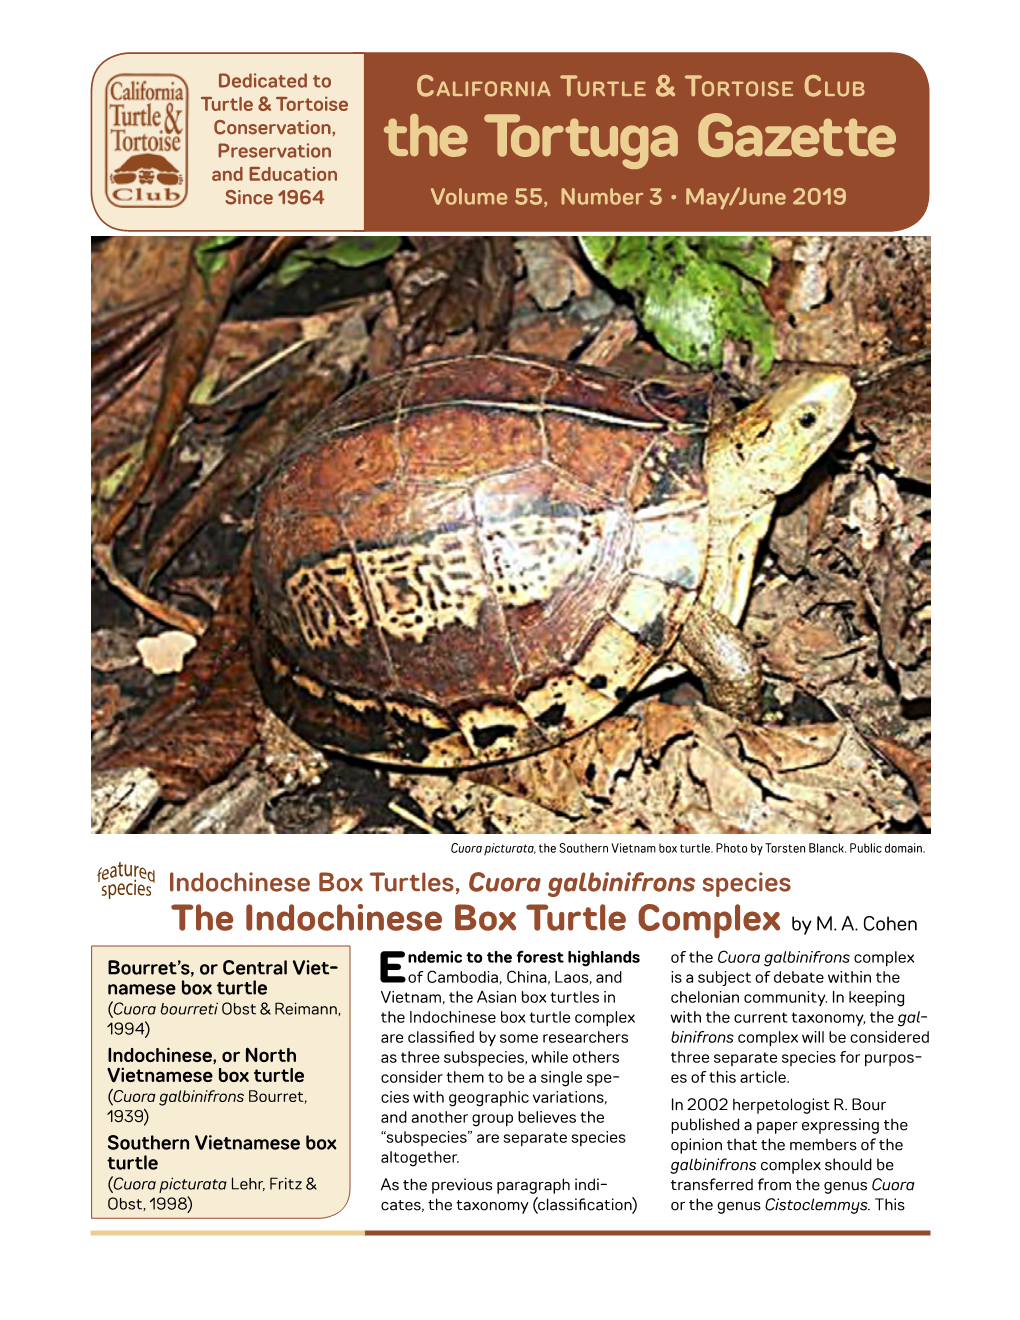 The Tortuga Gazette and Education Since 1964 Volume 55, Number 3 • May/June 2019